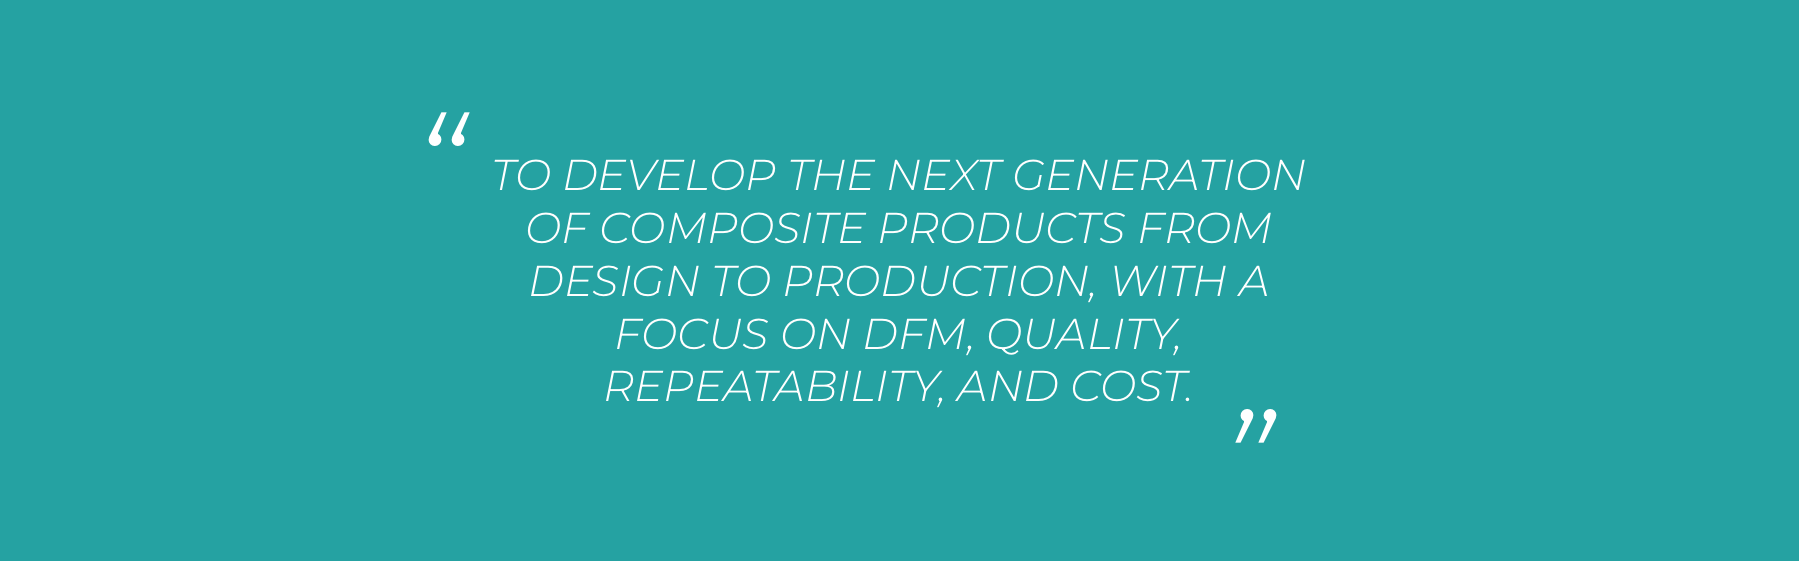 a quote image that says, "to develop the next generation of composite products from design to production, with a focus on DFM, quality, repeatability, and cost."